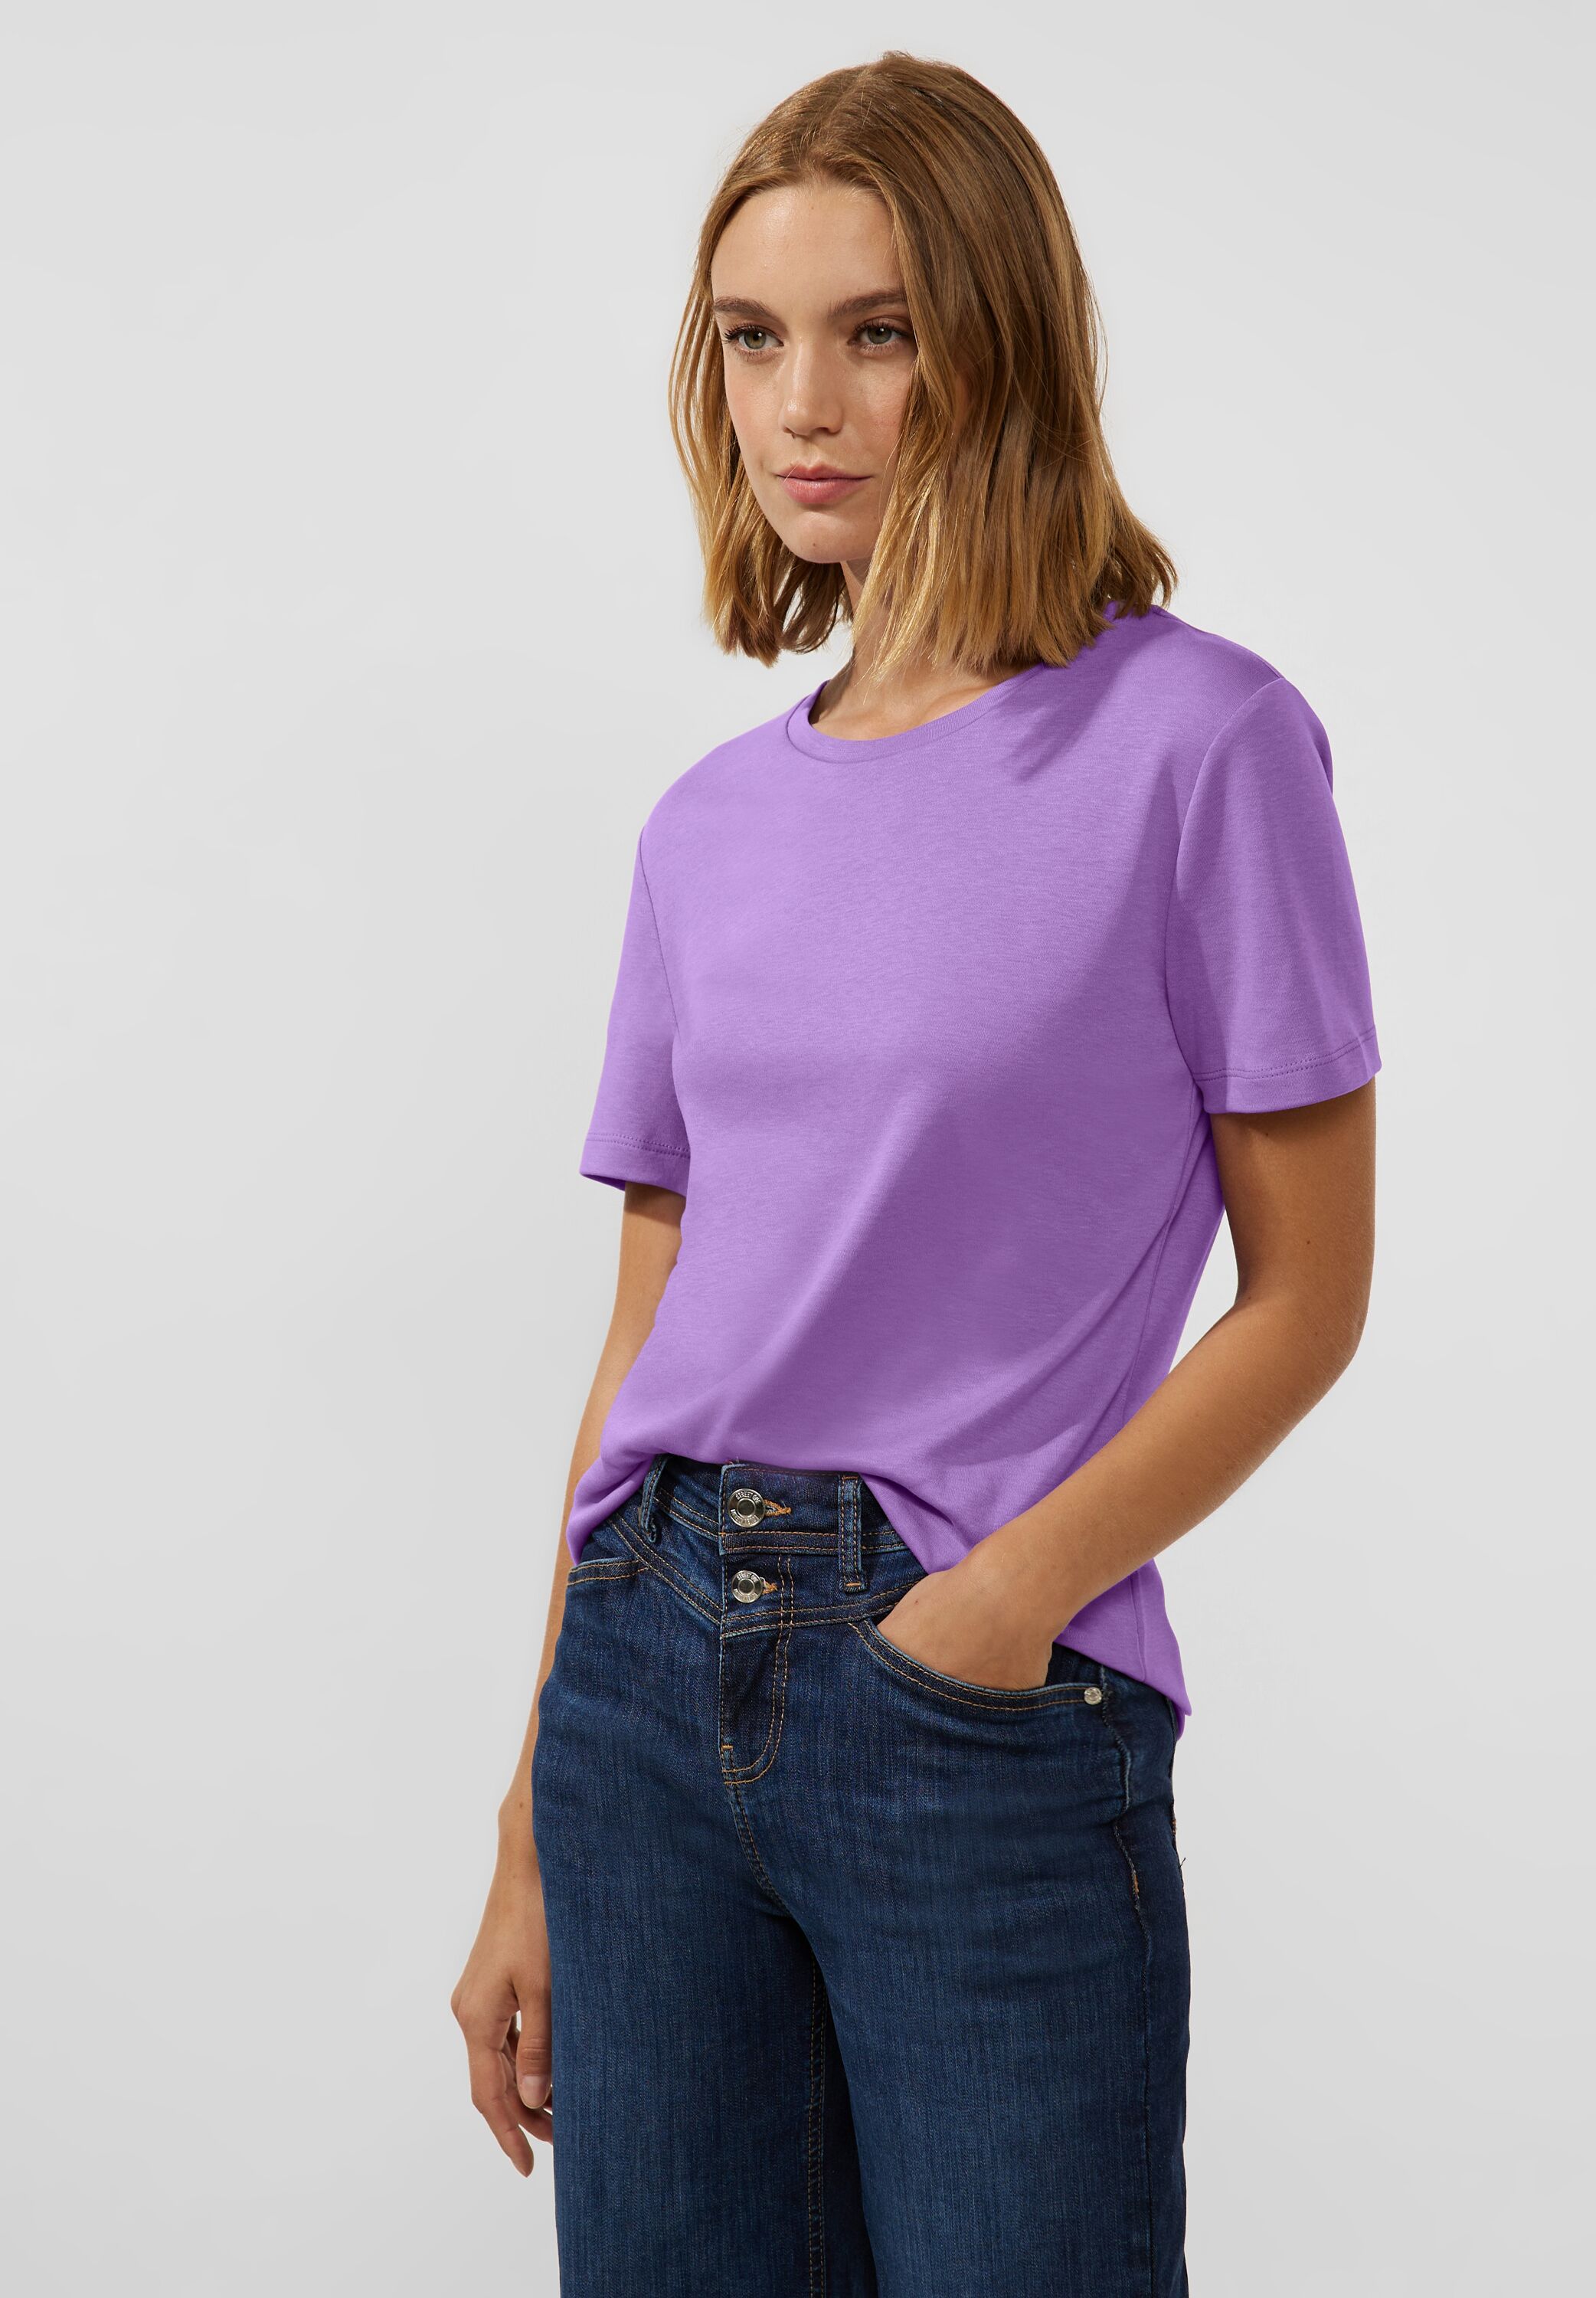 Street One T-Shirt in Lupine Lilac im SALE reduziert A320321-15181 -  CONCEPT Mode